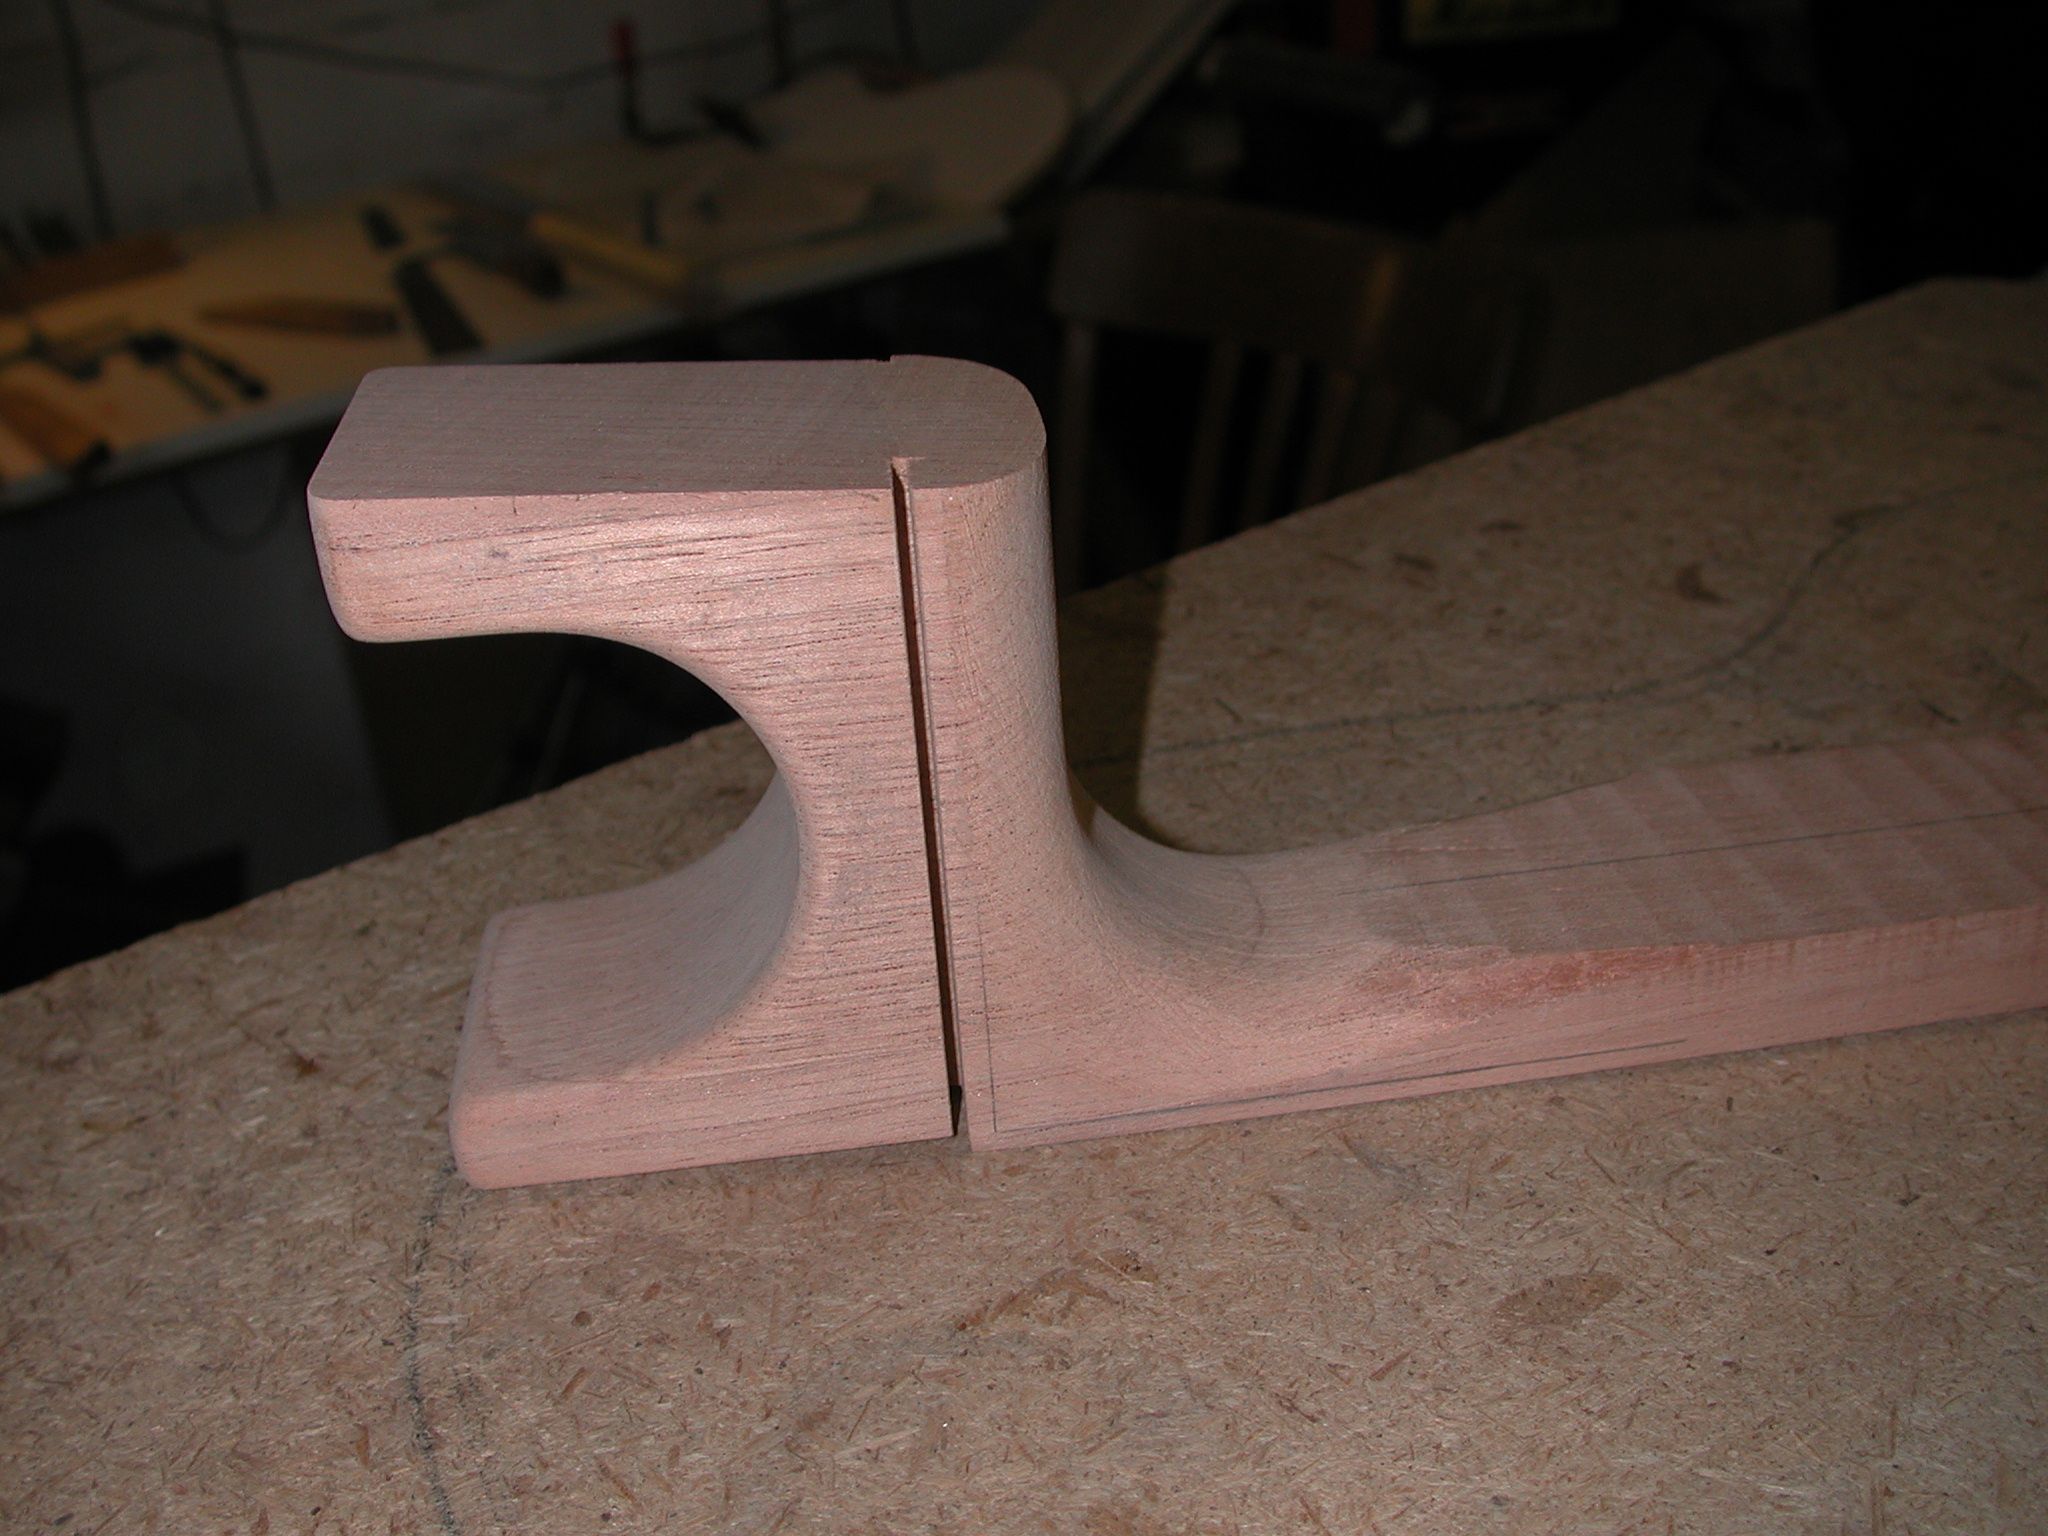 Neck: The heel is shaped.